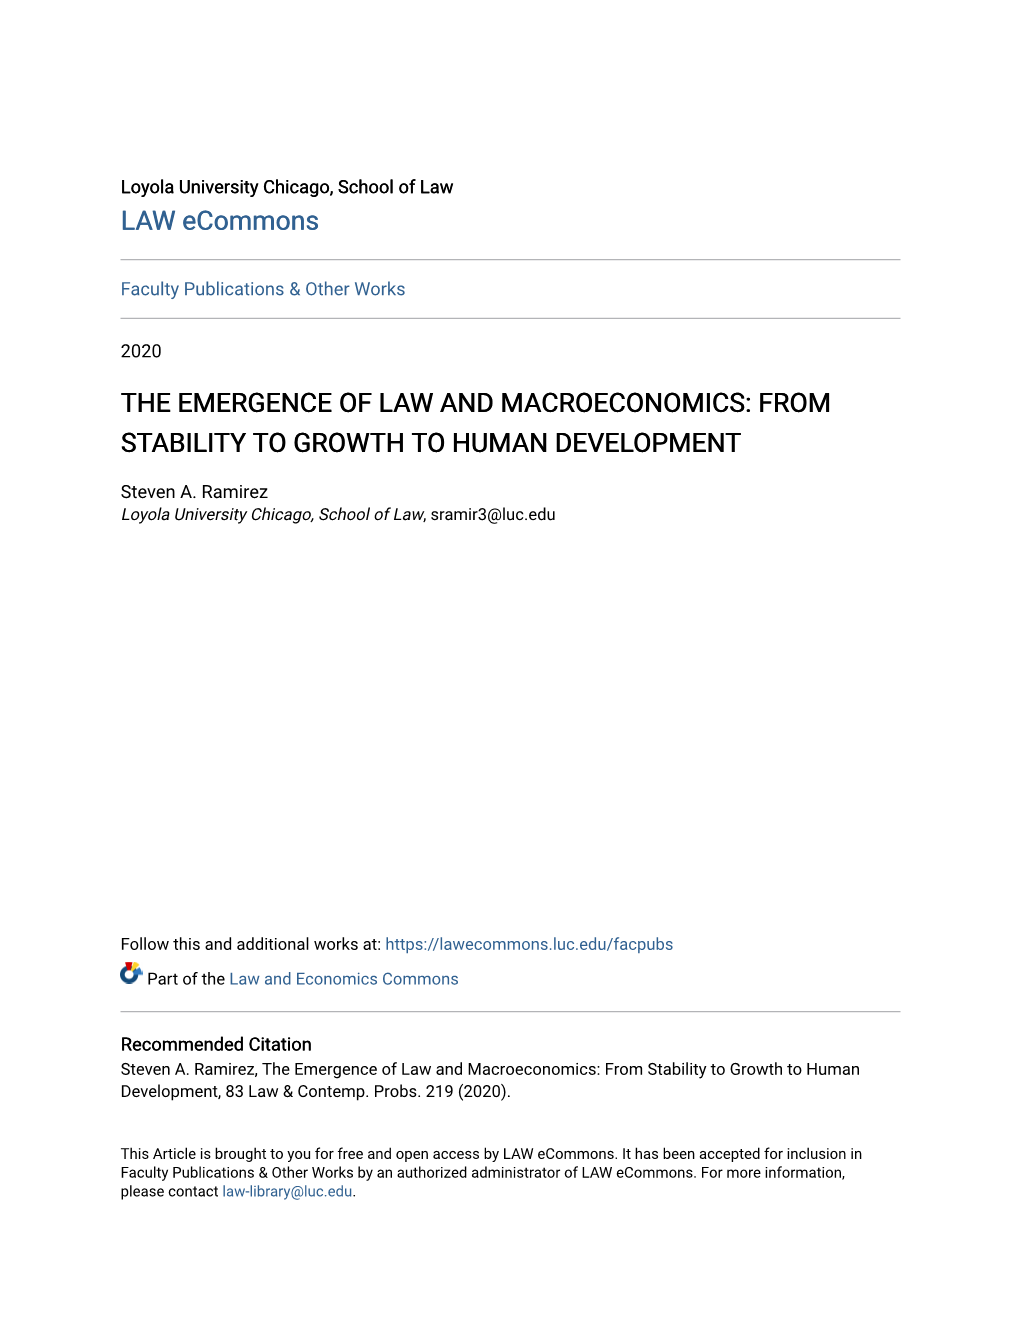 The Emergence of Law and Macroeconomics: from Stability to Growth to Human Development